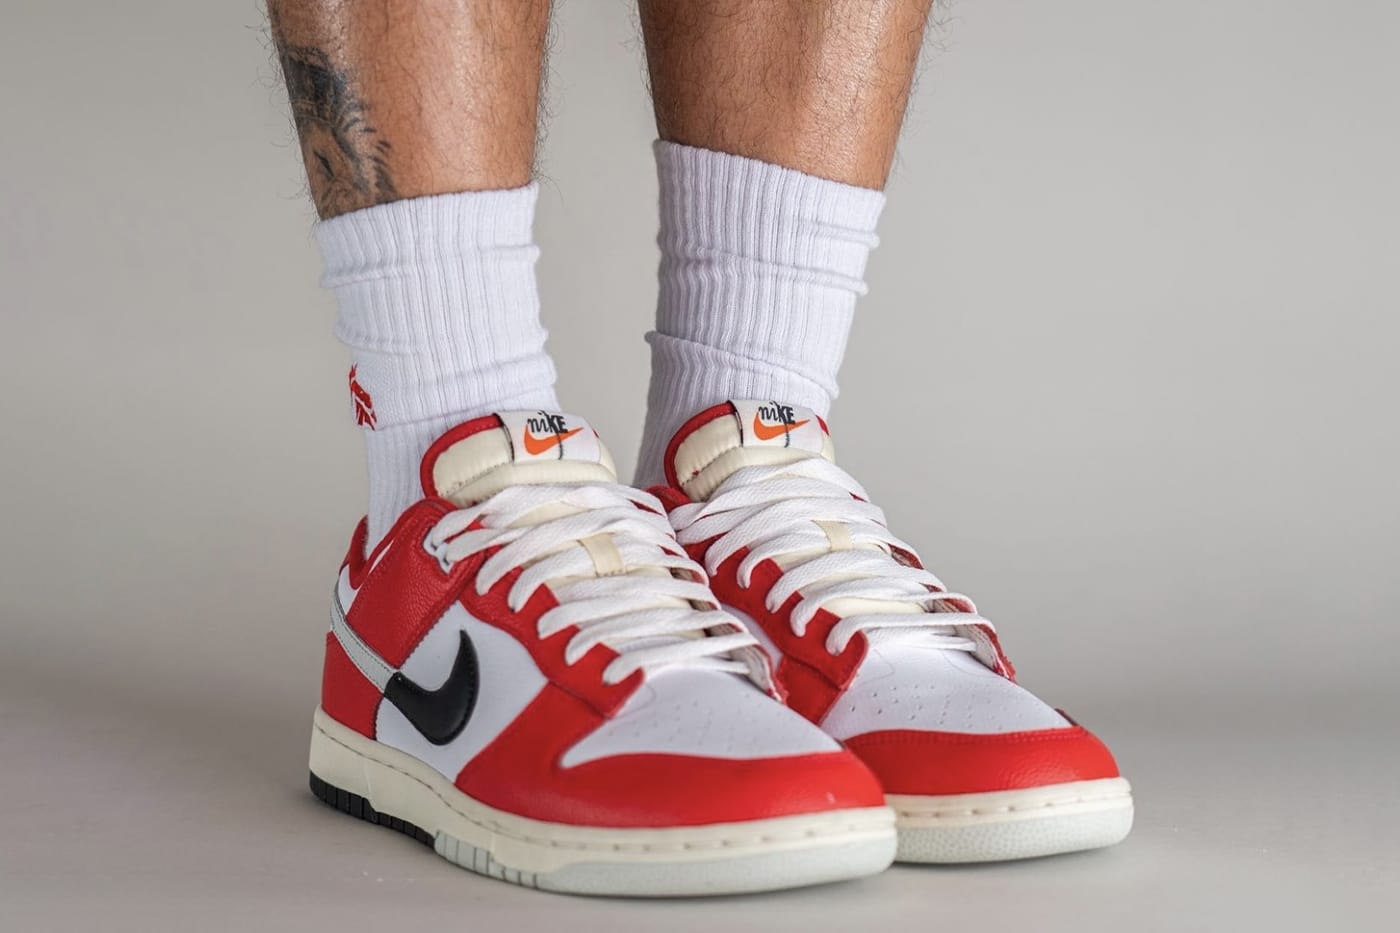 Nike Dunk Low “Chicago Split” On Foot Photos   Hypebeast